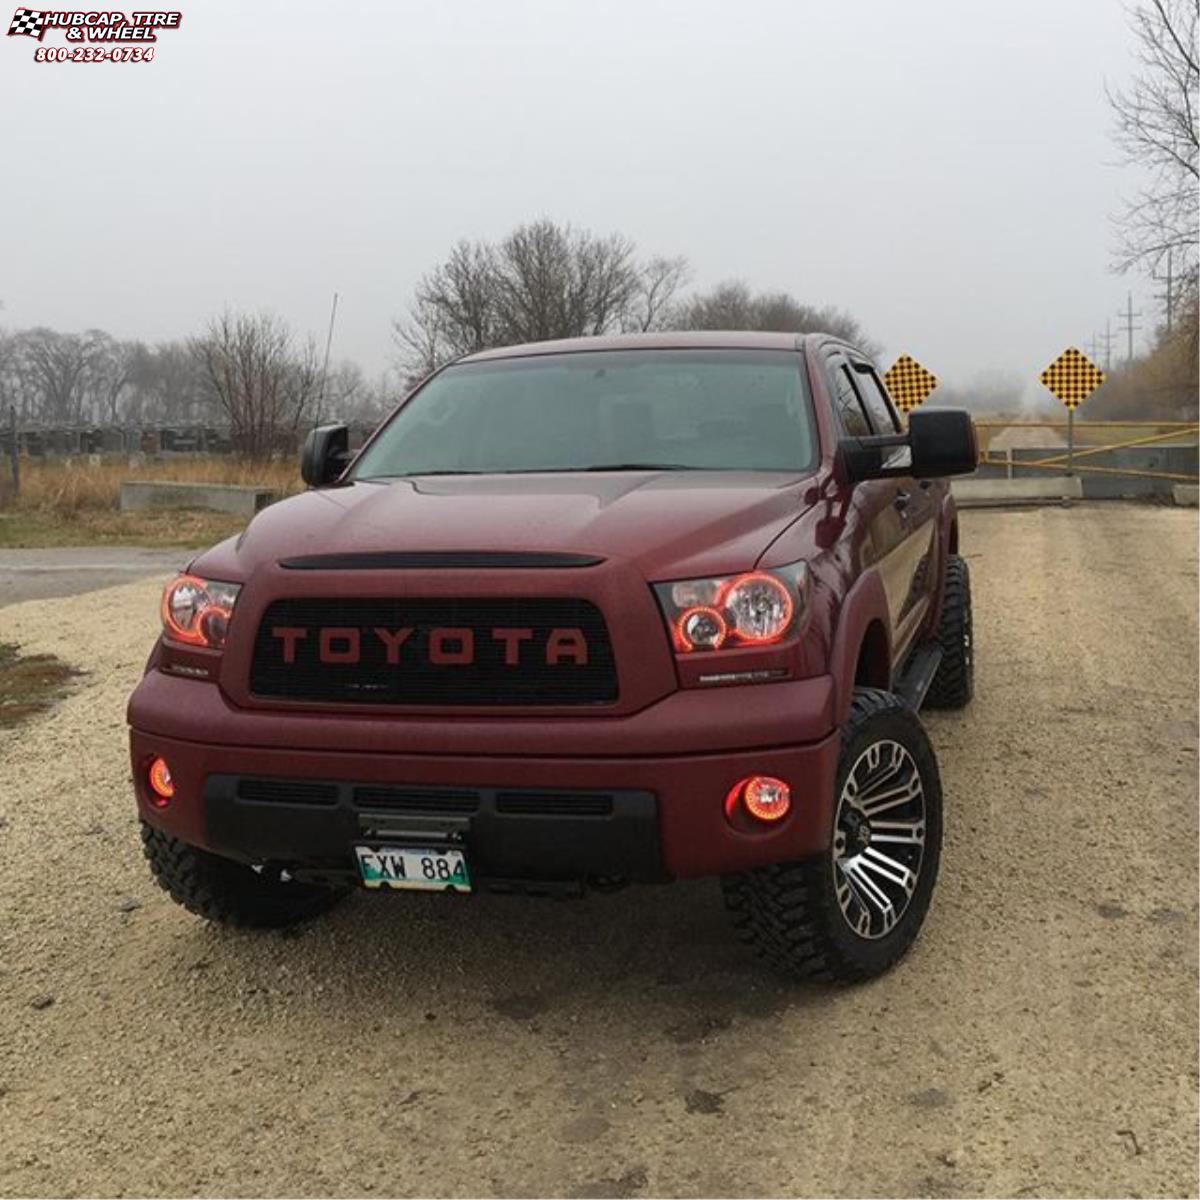 vehicle gallery/toyota tundra xd series xd810 brigade   wheels and rims